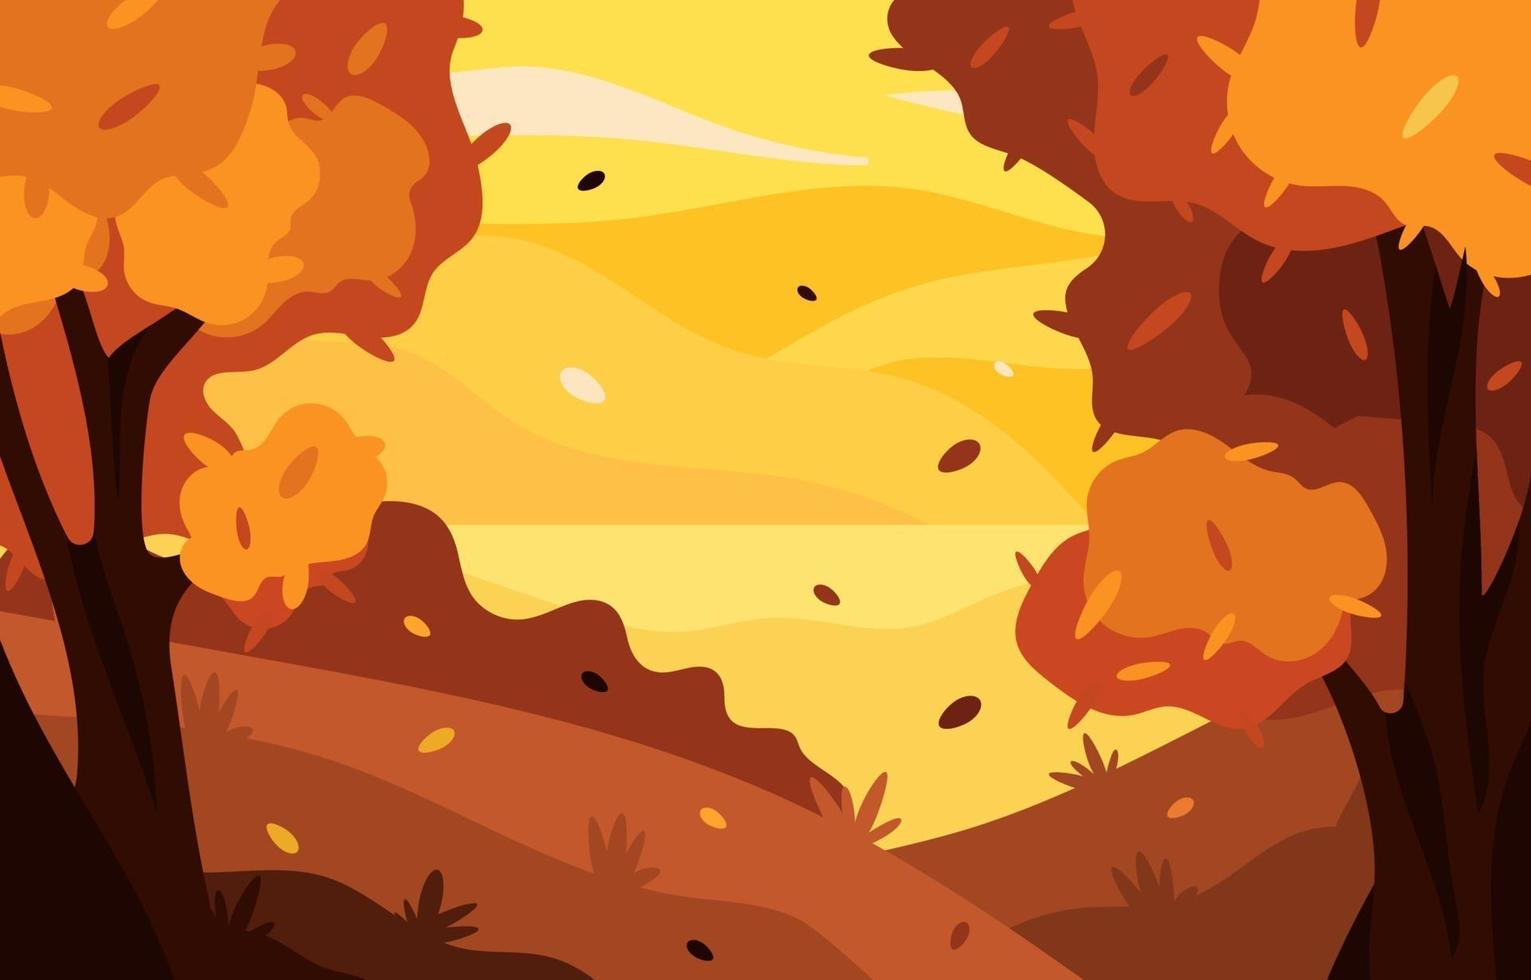 Forest in Autumn Scenery Background vector